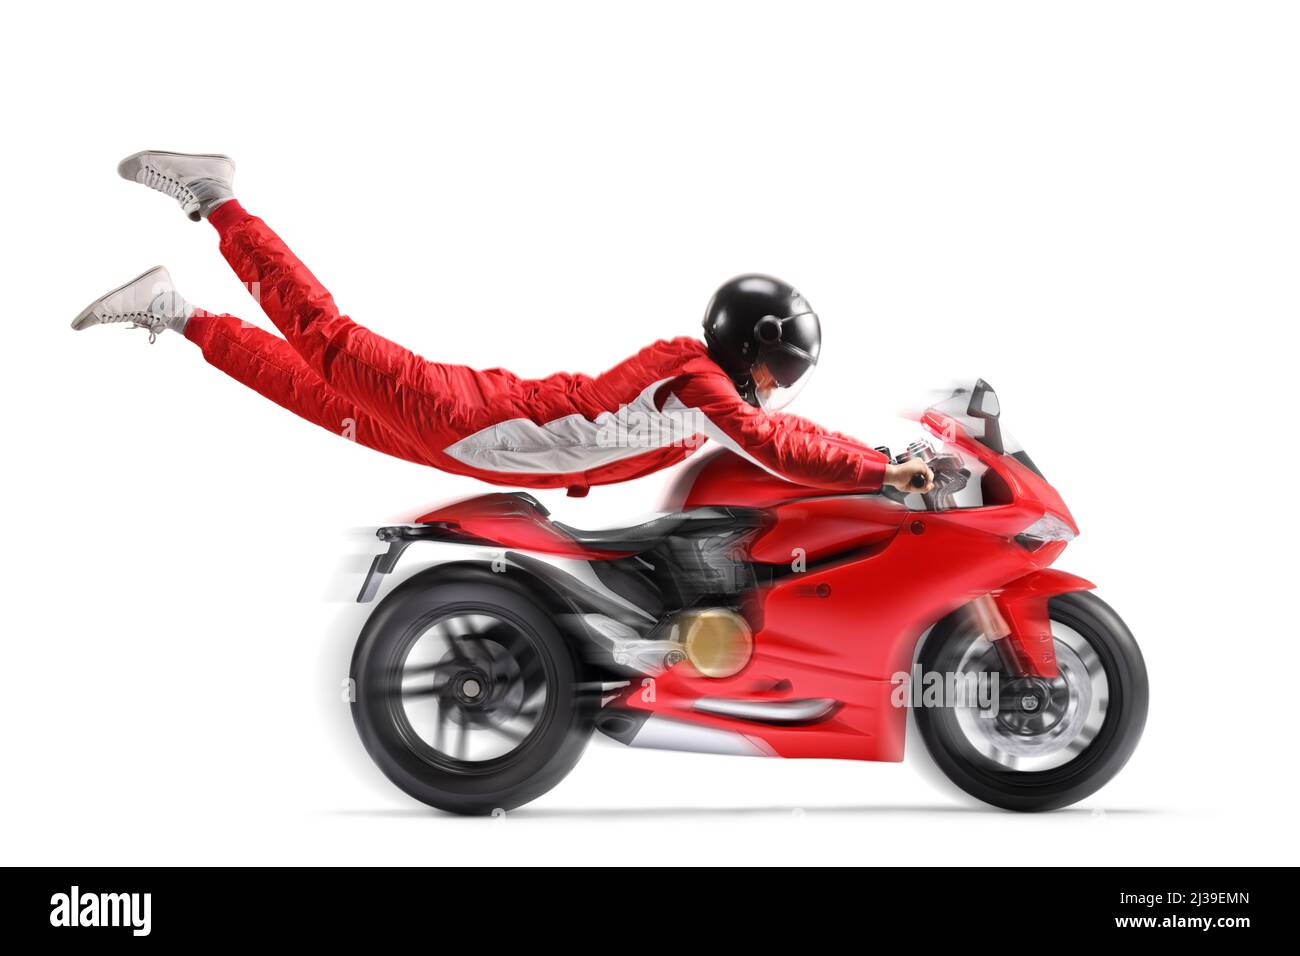 Racer flying and holding onto a red motorbike isolated on white background Stock Photo